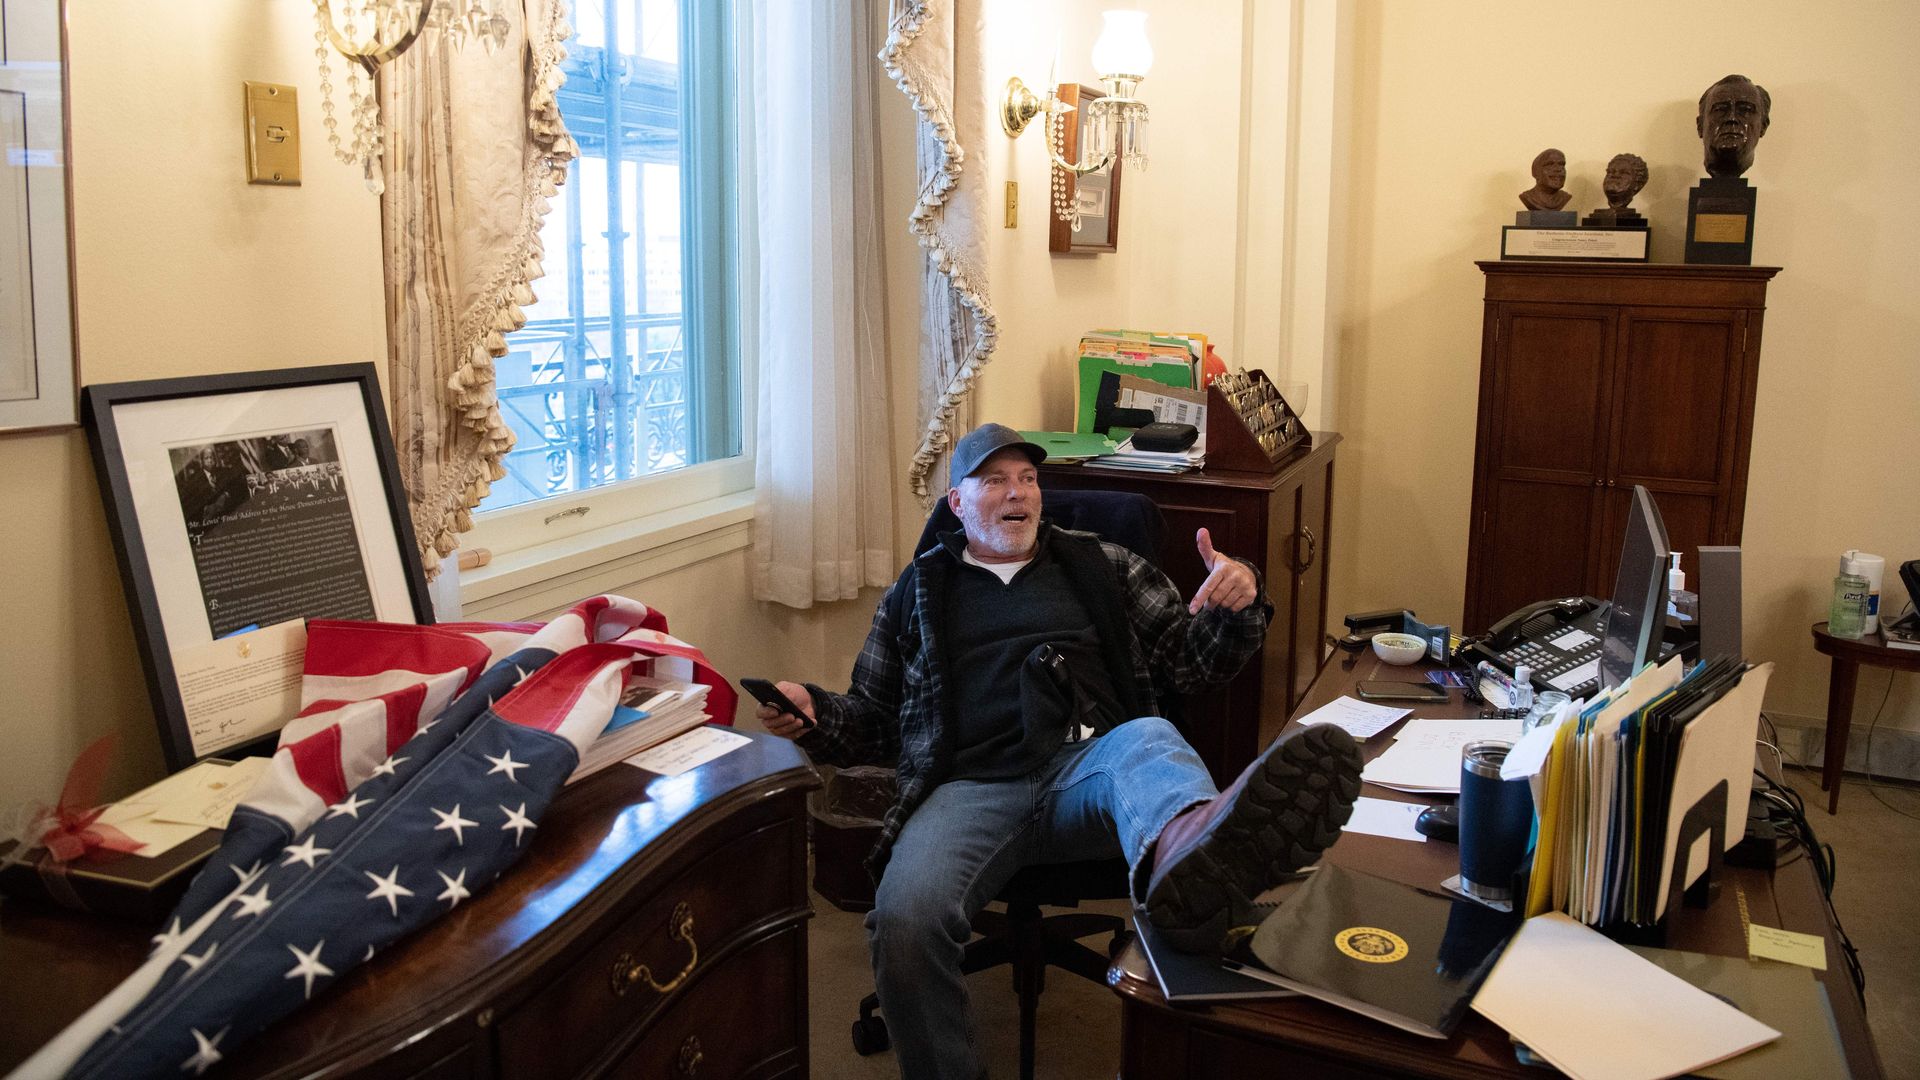 A pro-Trump supporter is seen sitting in the office of House Speaker Nancy Pelosi after overrunning the Capitol today.